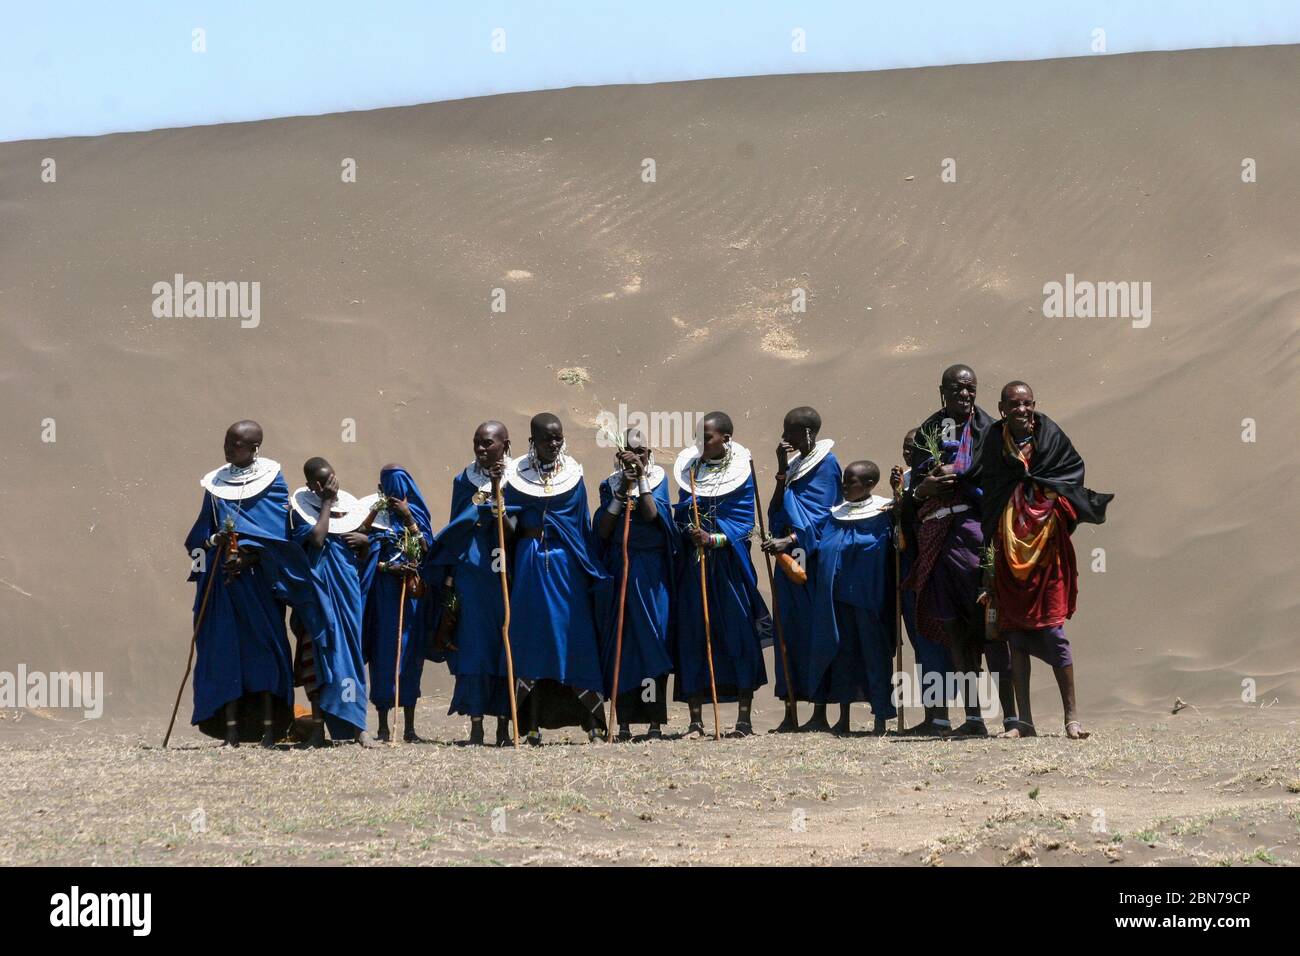 A Group of Maasai women in blue robes. Maasai is an ethnic group of semi-nomadic people. Photographed in Tanzania Stock Photo